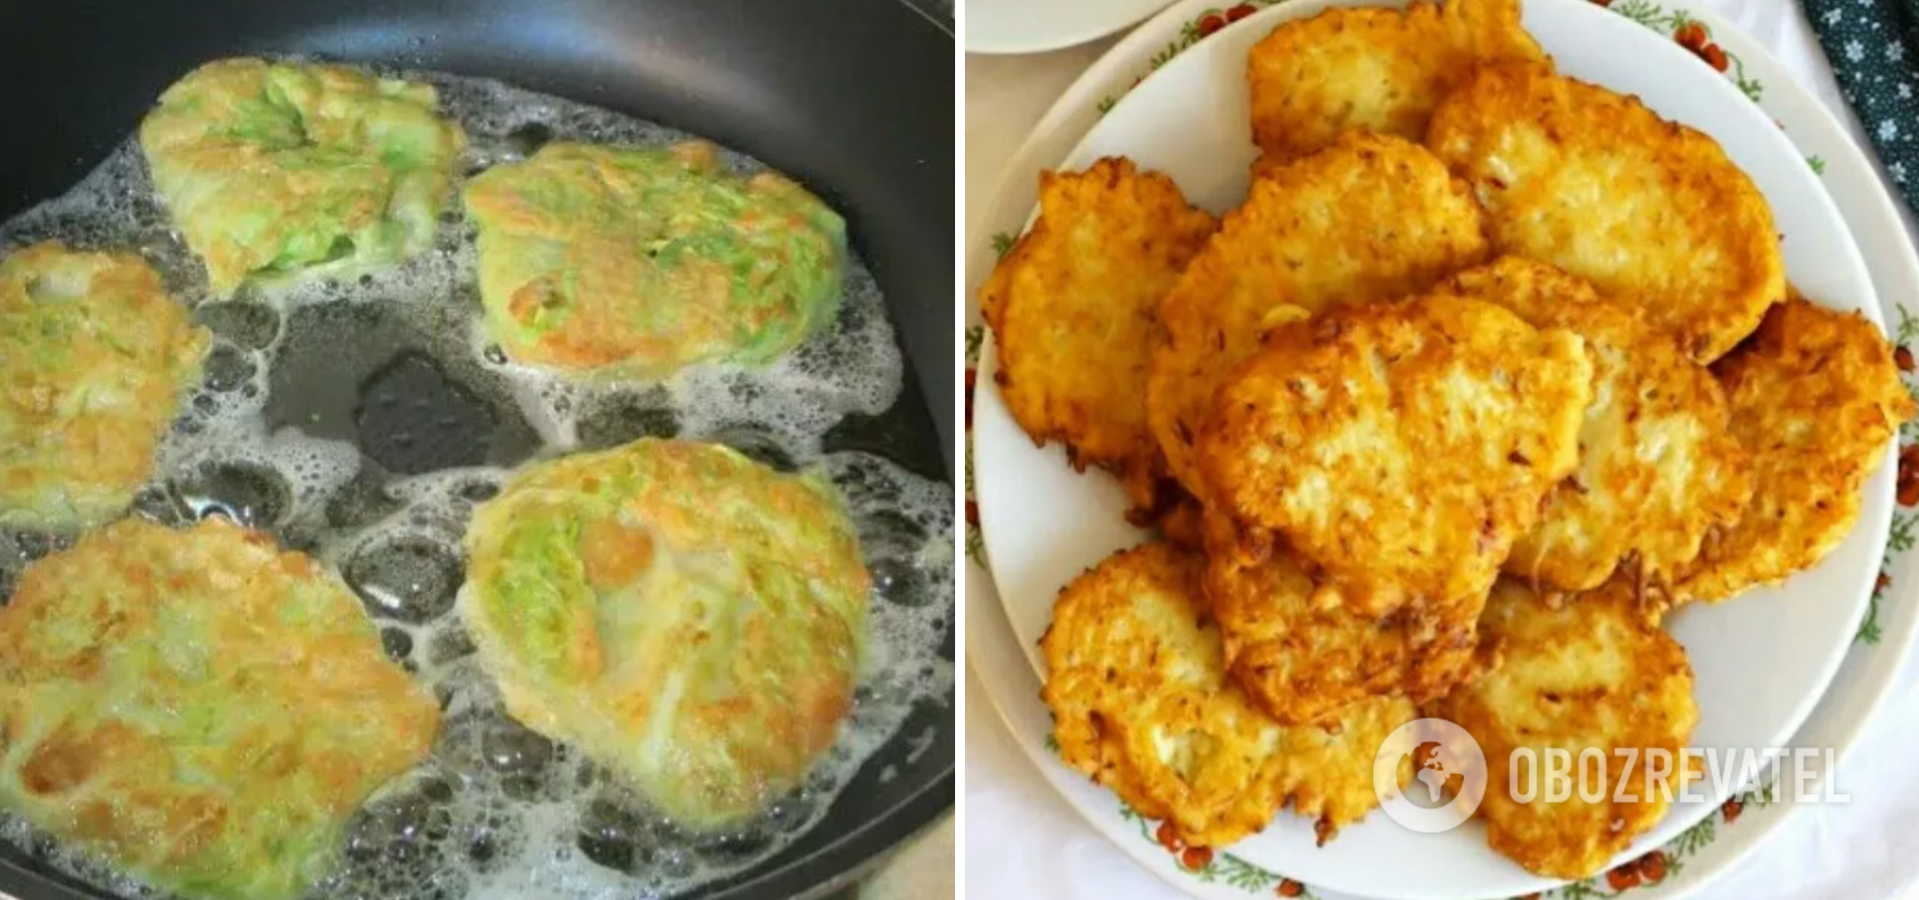 Cabbage in batter